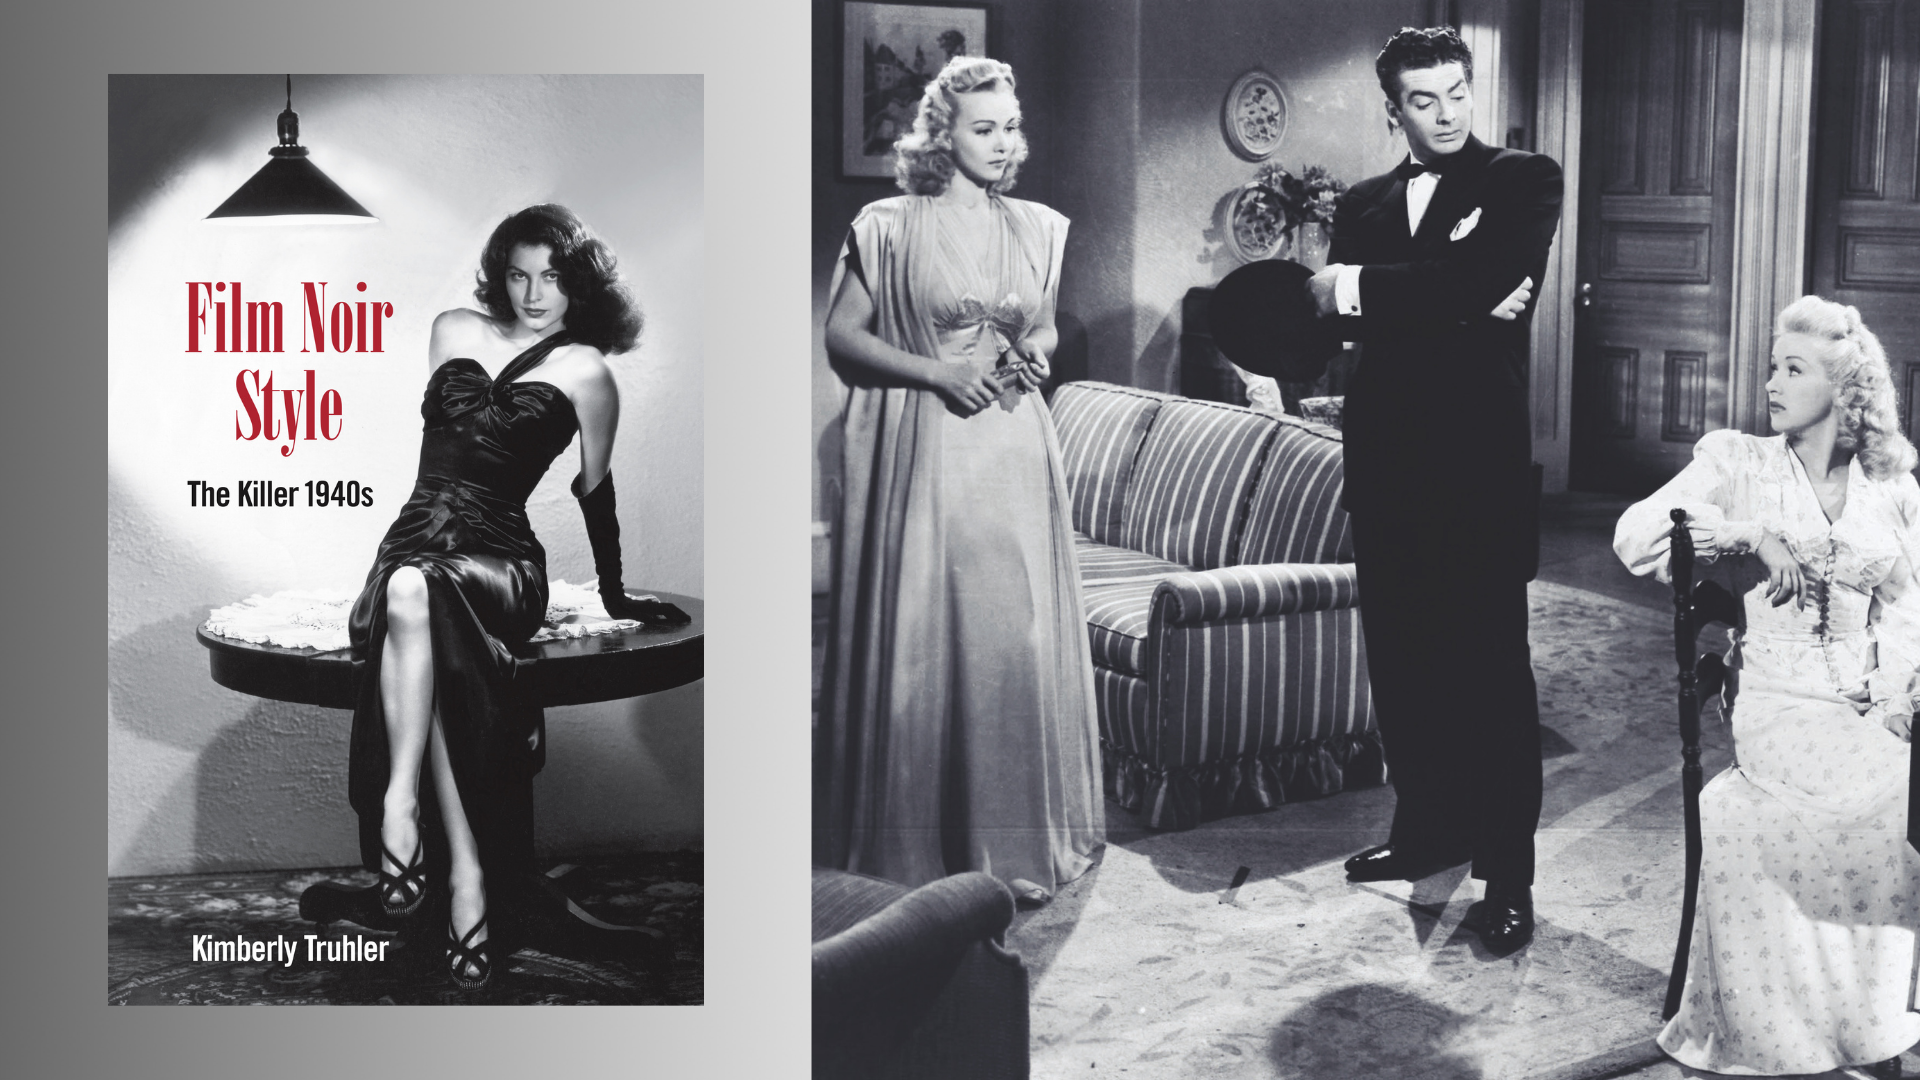 "Film Noir Style" by Kimberly Truhler looks back at the fashions of 1940s era femme fatales.